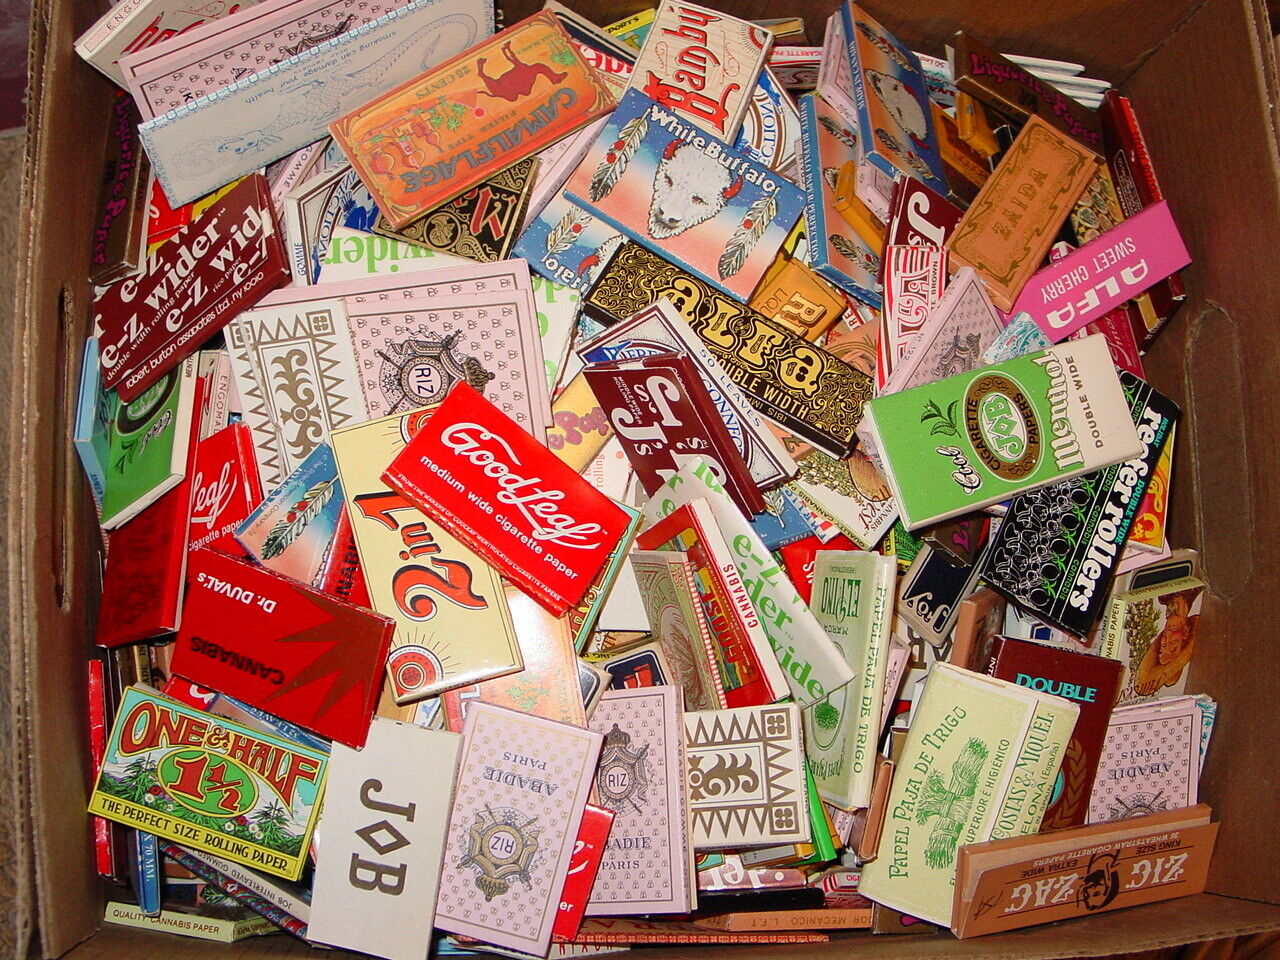 CIGARETTE ROLLING PAPERS VINTAGE 1970's STORED FRESH & DRY LOT of 50 SUPER SALE